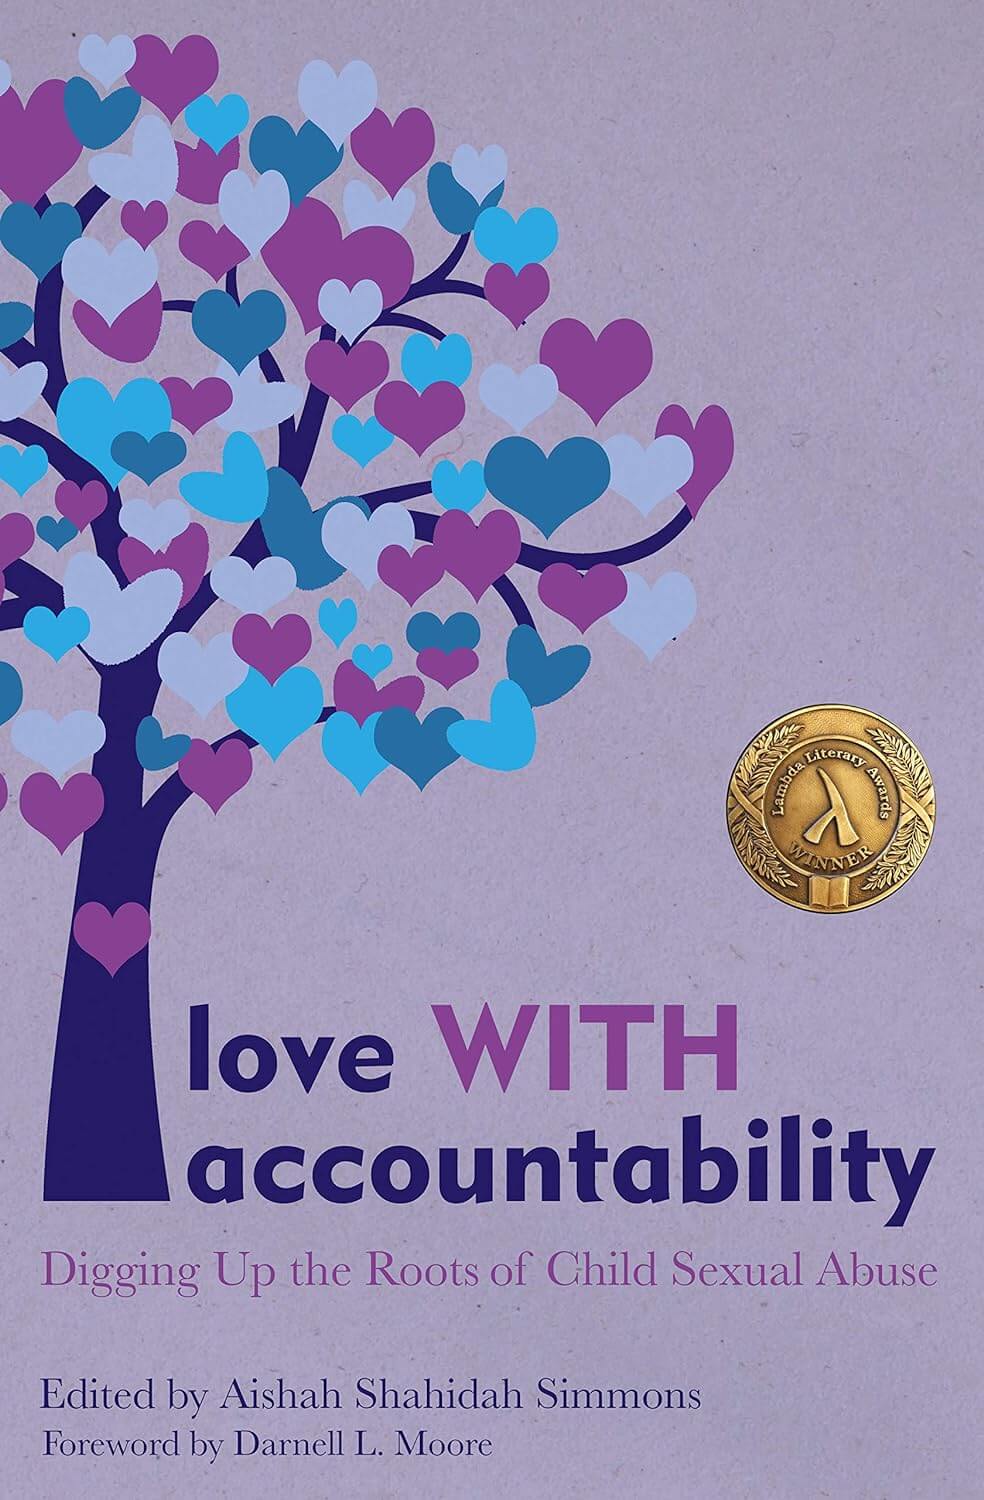 love WITH accountability: Digging Up the Roots of Child Sexual Abuse